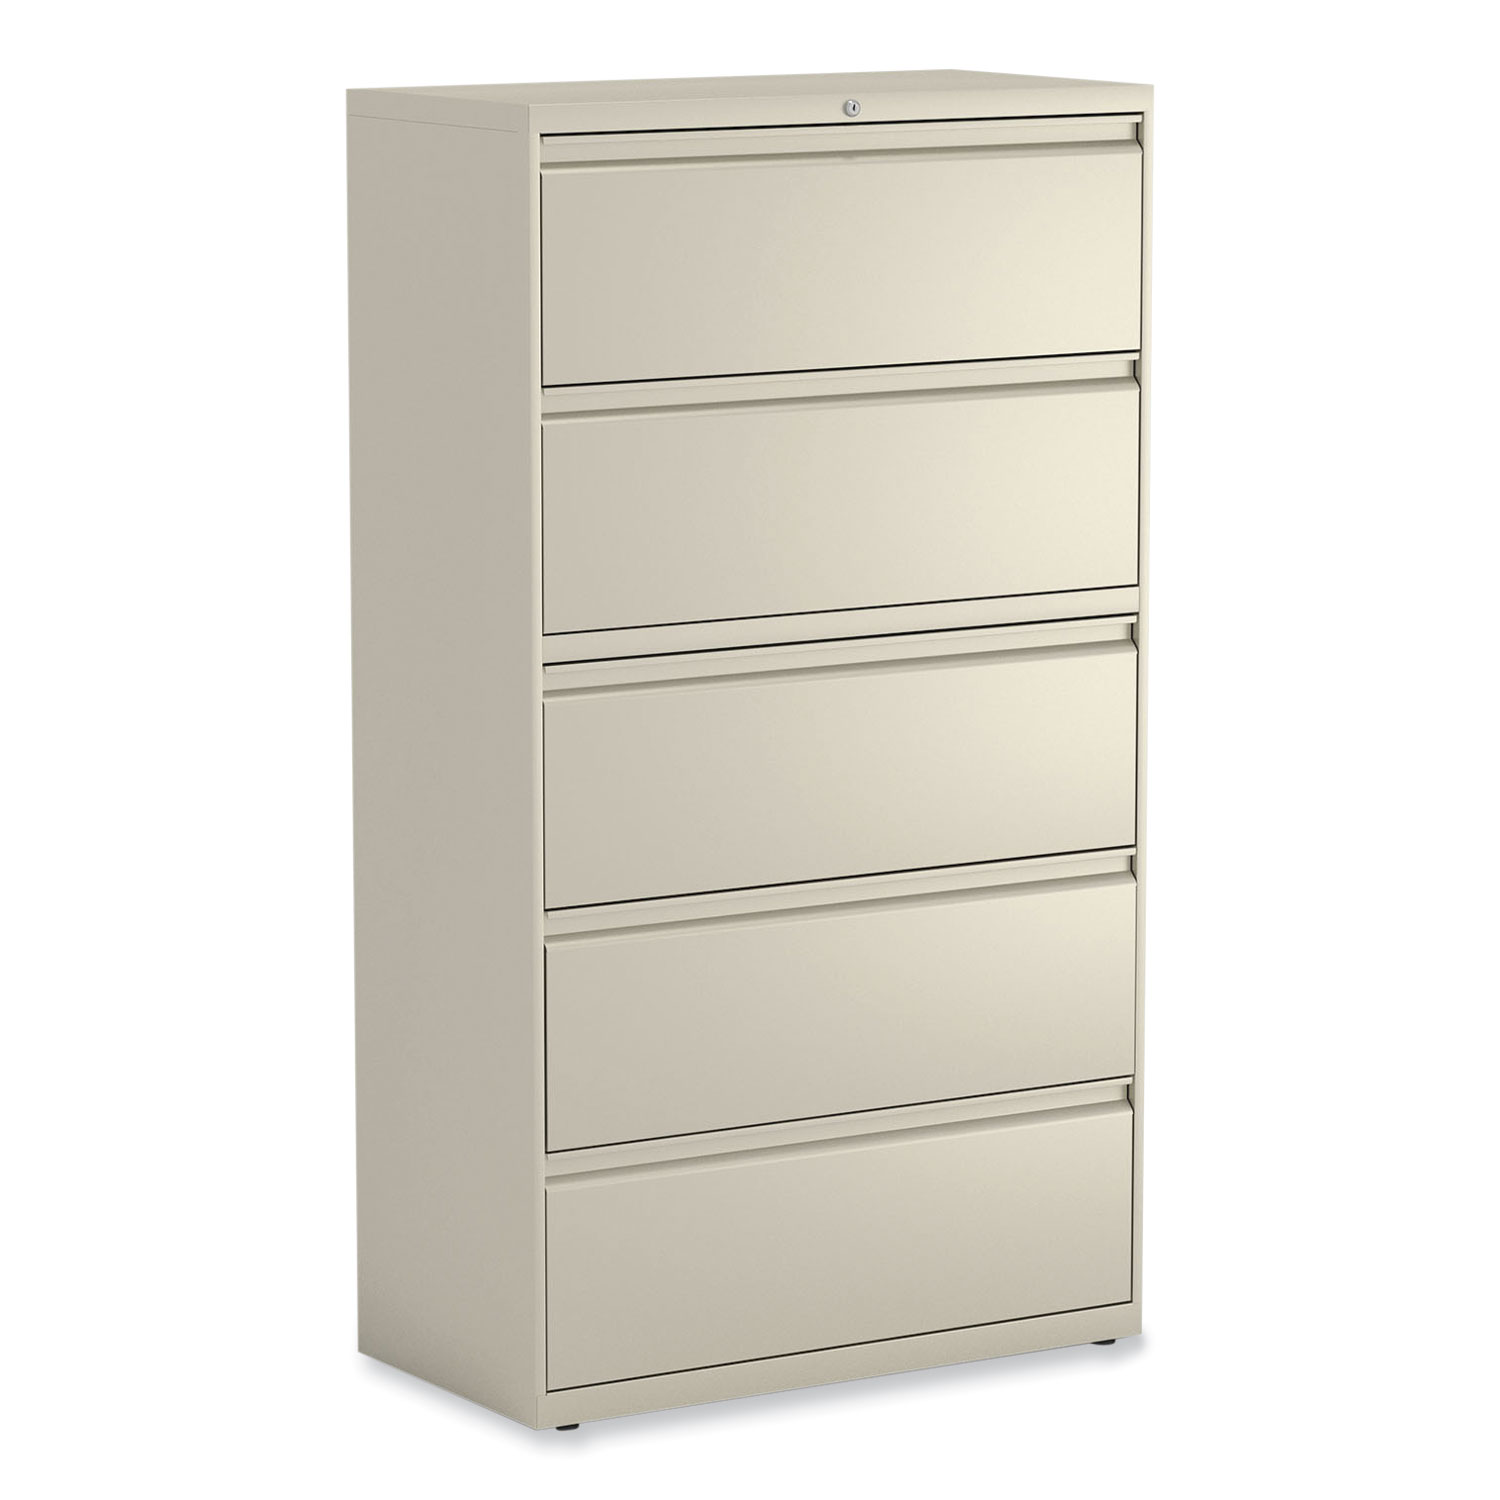 Alera Lateral File, 5 Legal/Letter/A4/A5-Size File Drawers, Putty, 36" x 18.63" x 67.63" - image 1 of 7